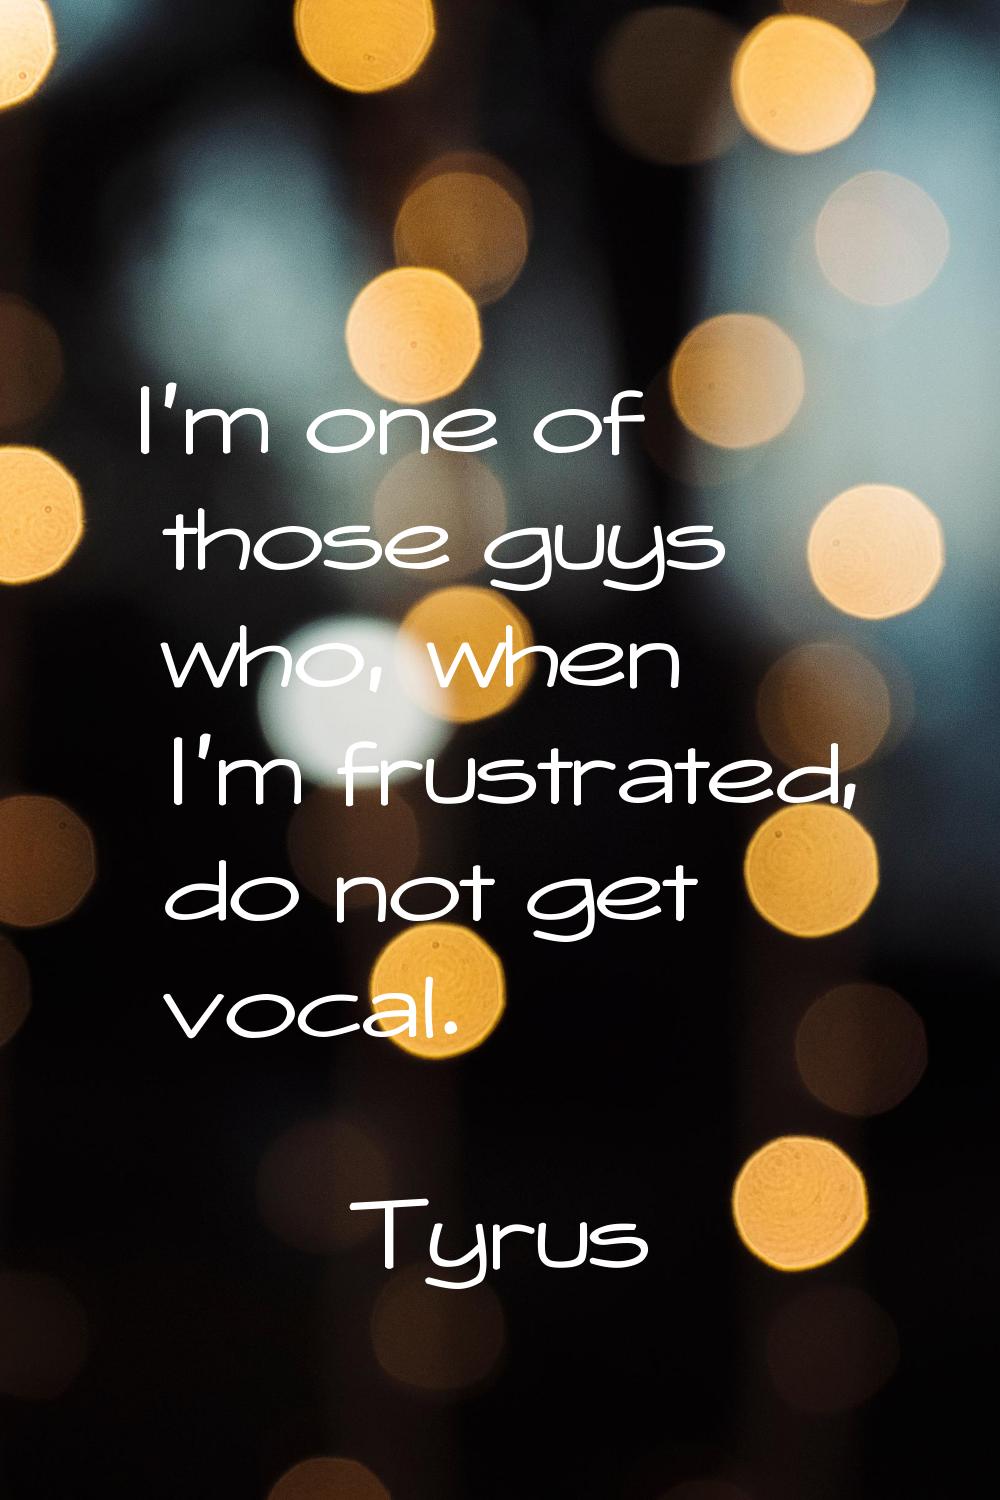 I'm one of those guys who, when I'm frustrated, do not get vocal.